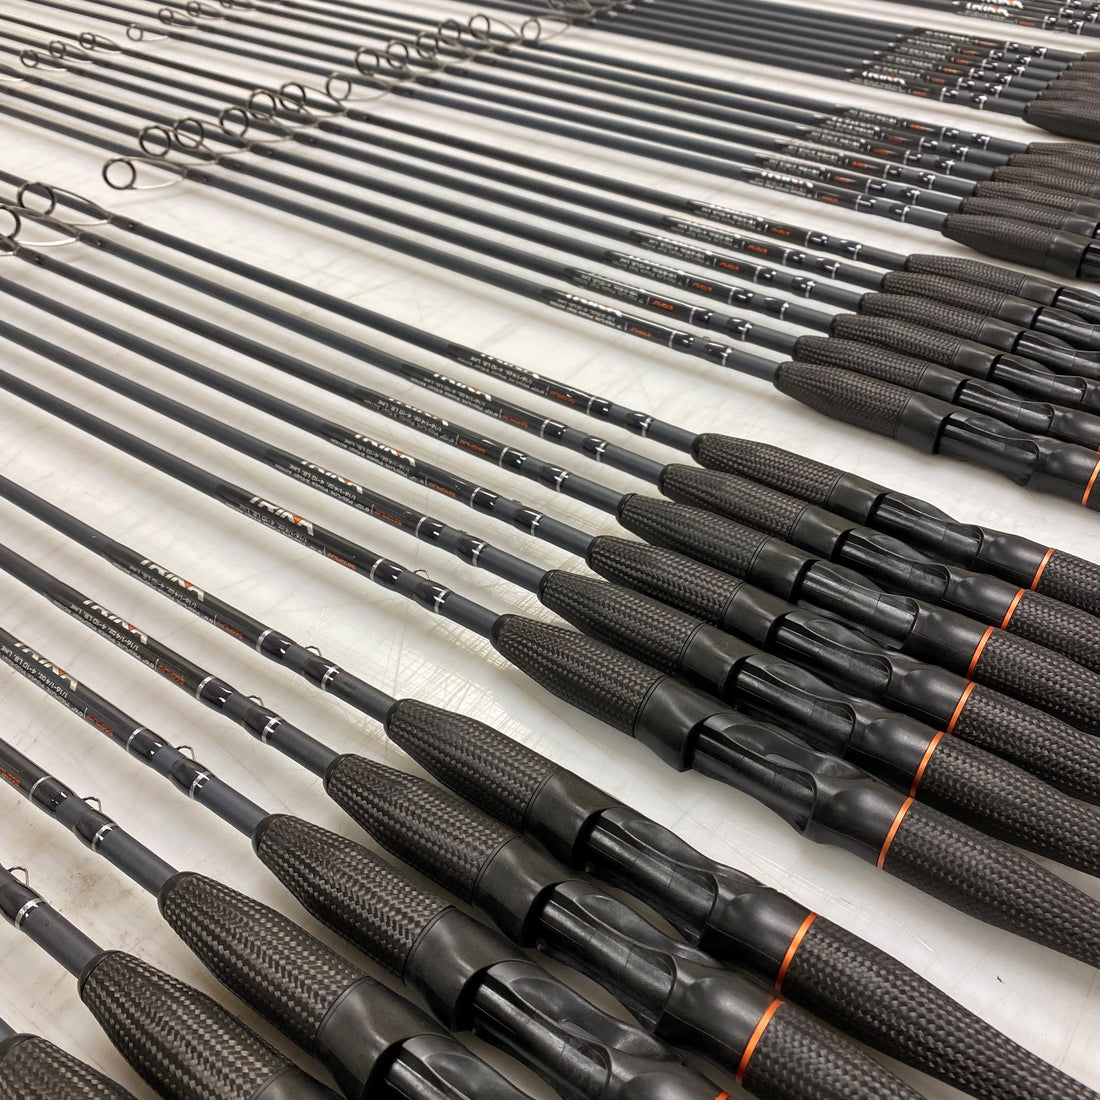 ALL RODS NOW IN STOCK!